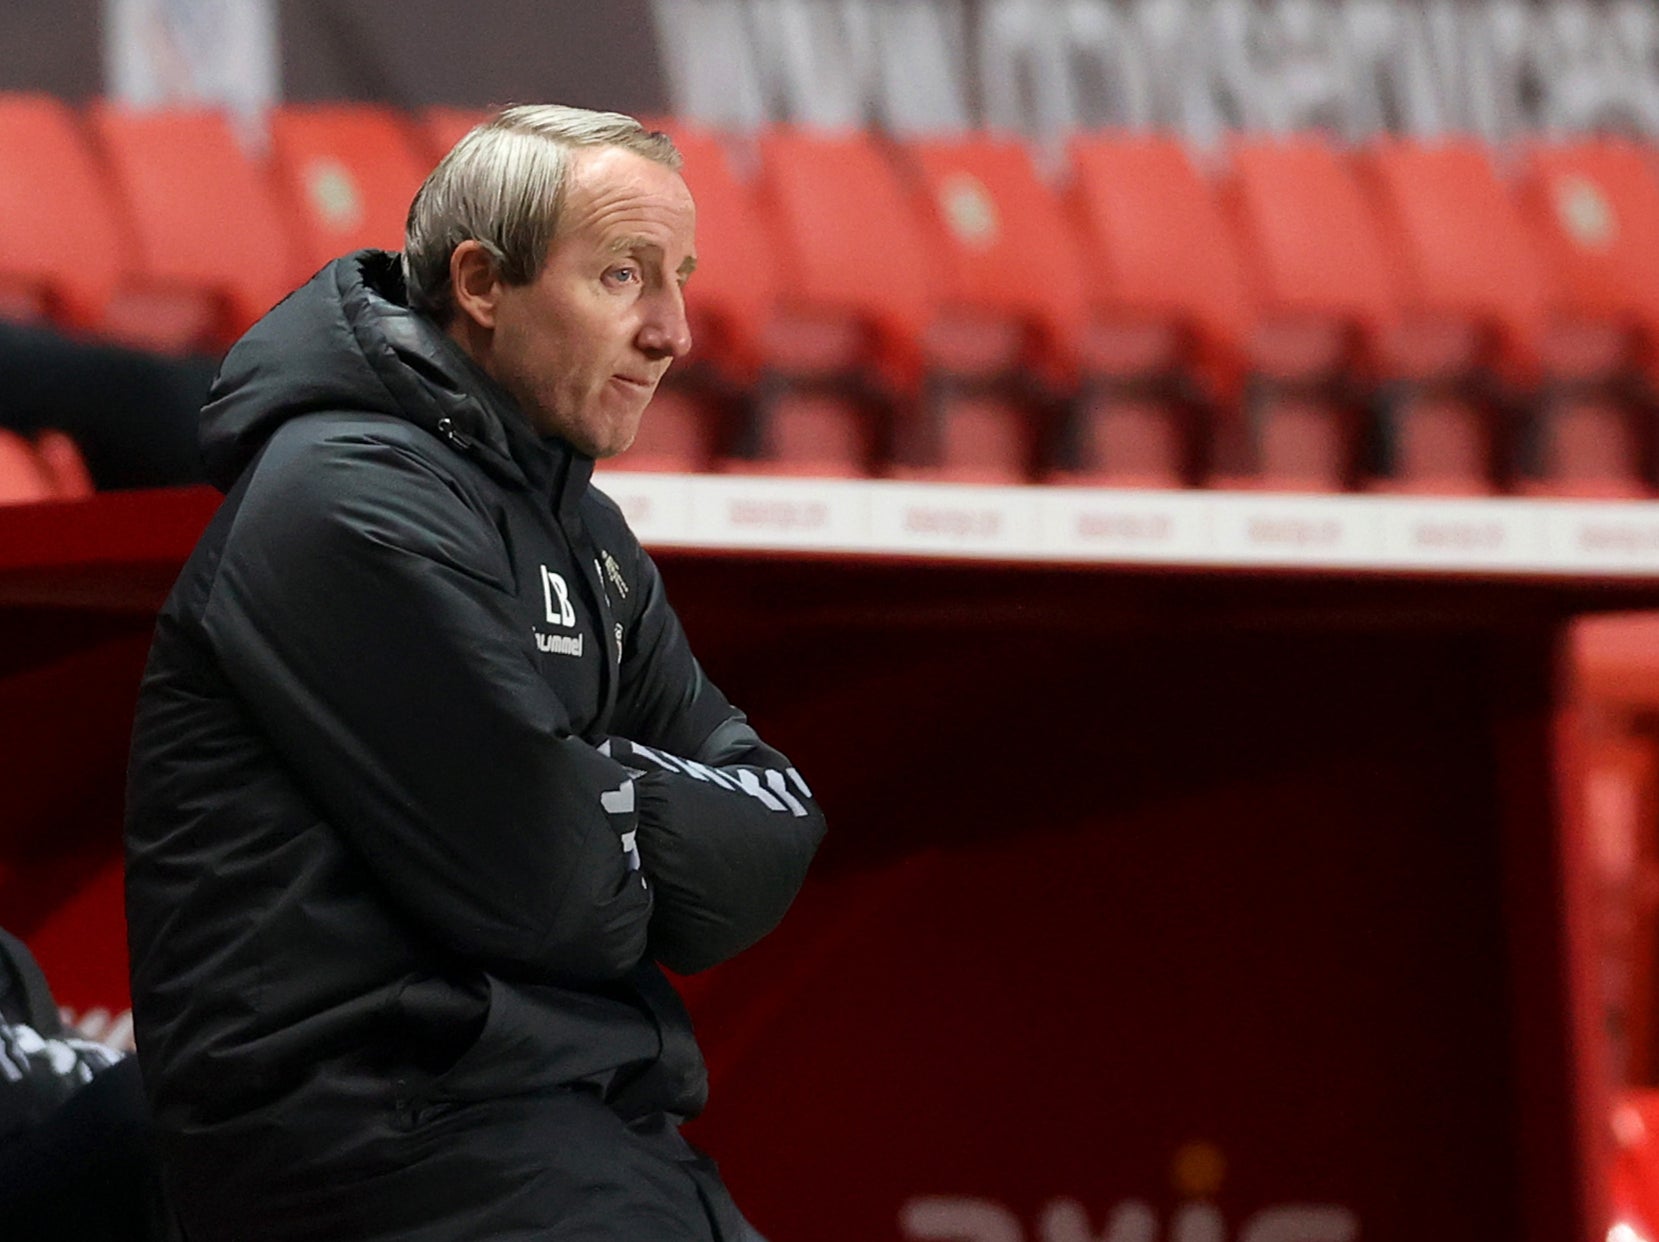 Lee Bowyer has left his role as manager at Charlton